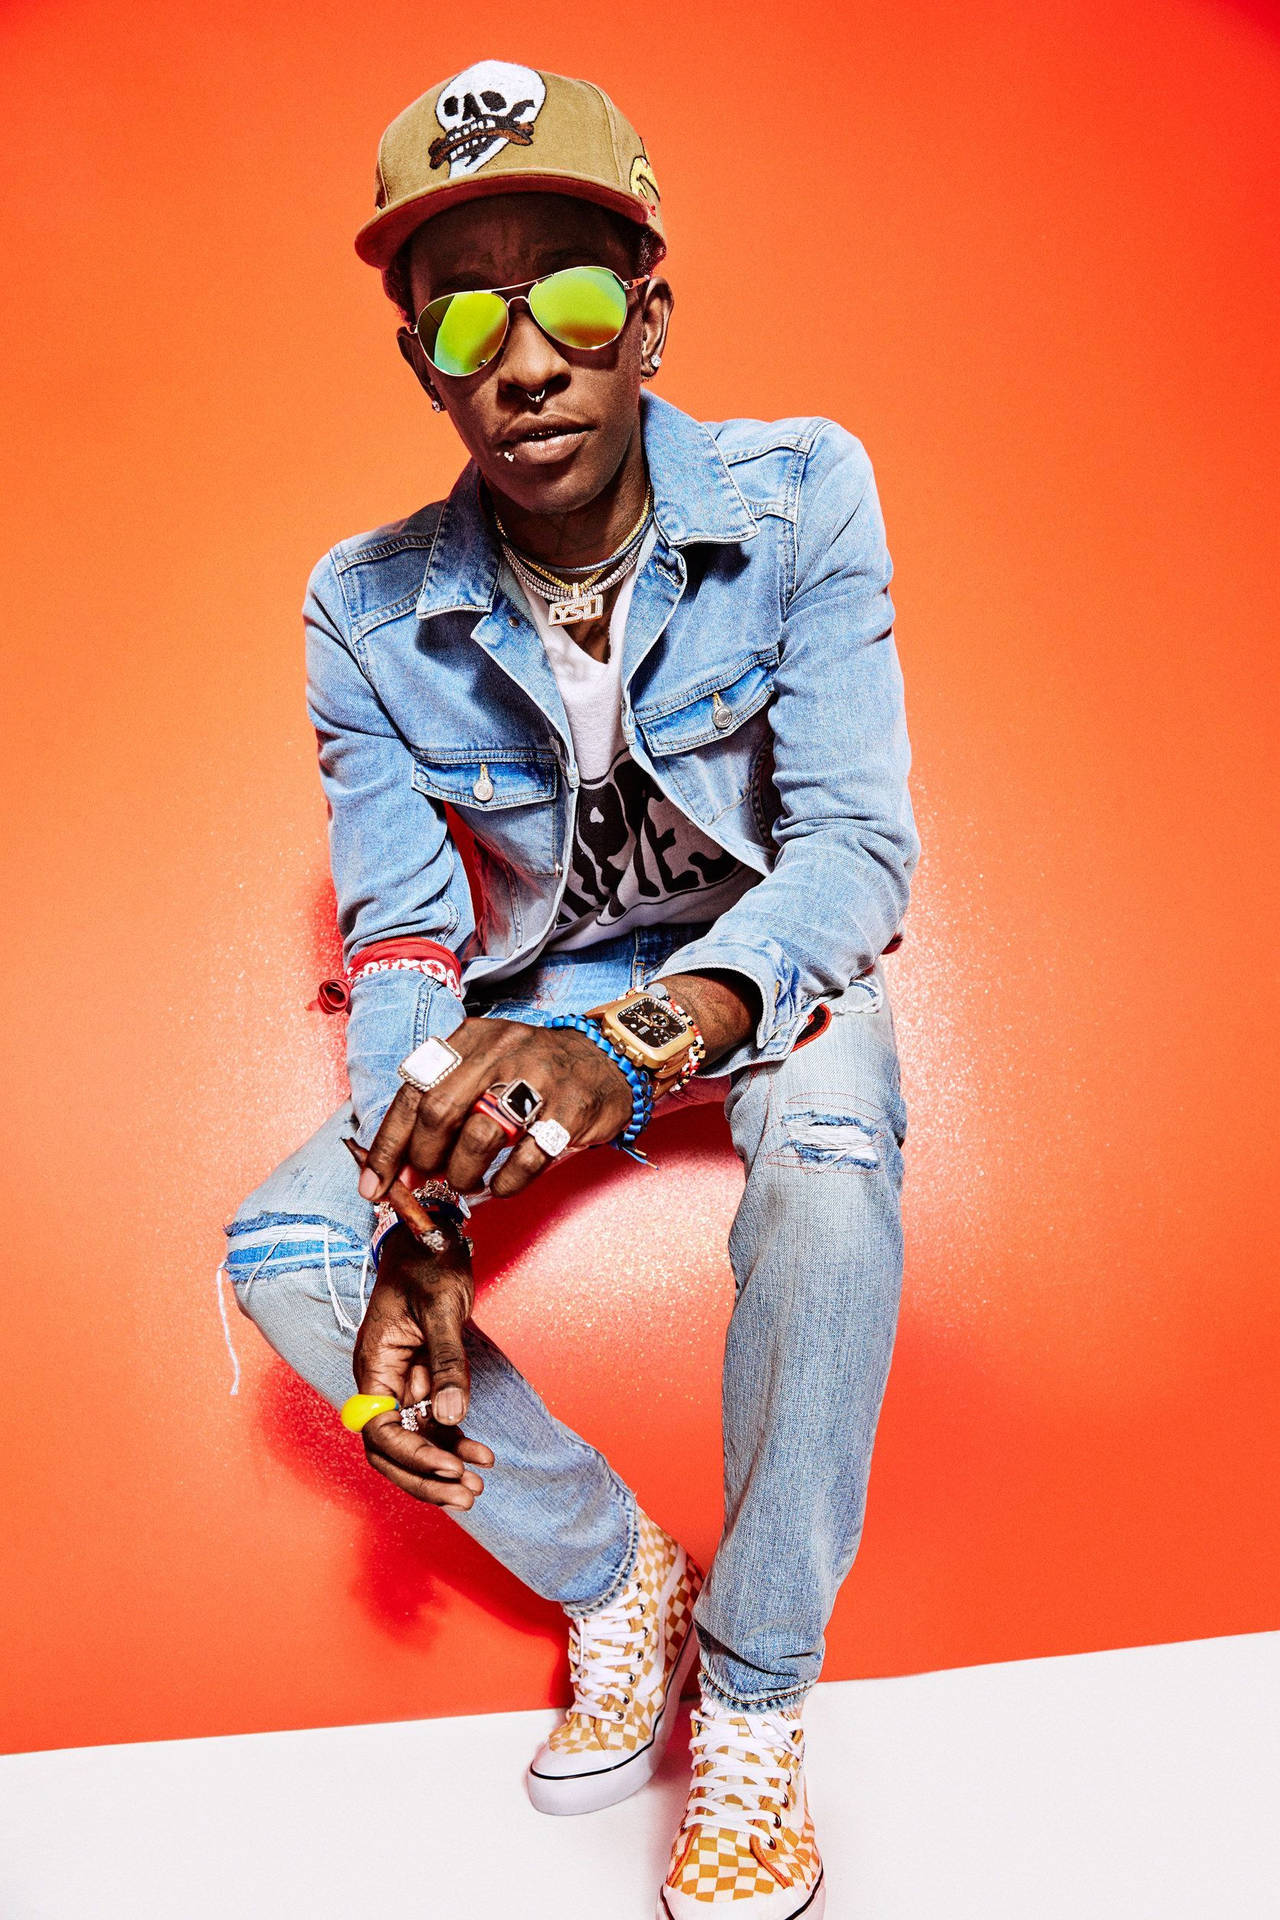 Young Thug rocks an outrageous outfit in his GQ Magazine photoshoot Wallpaper